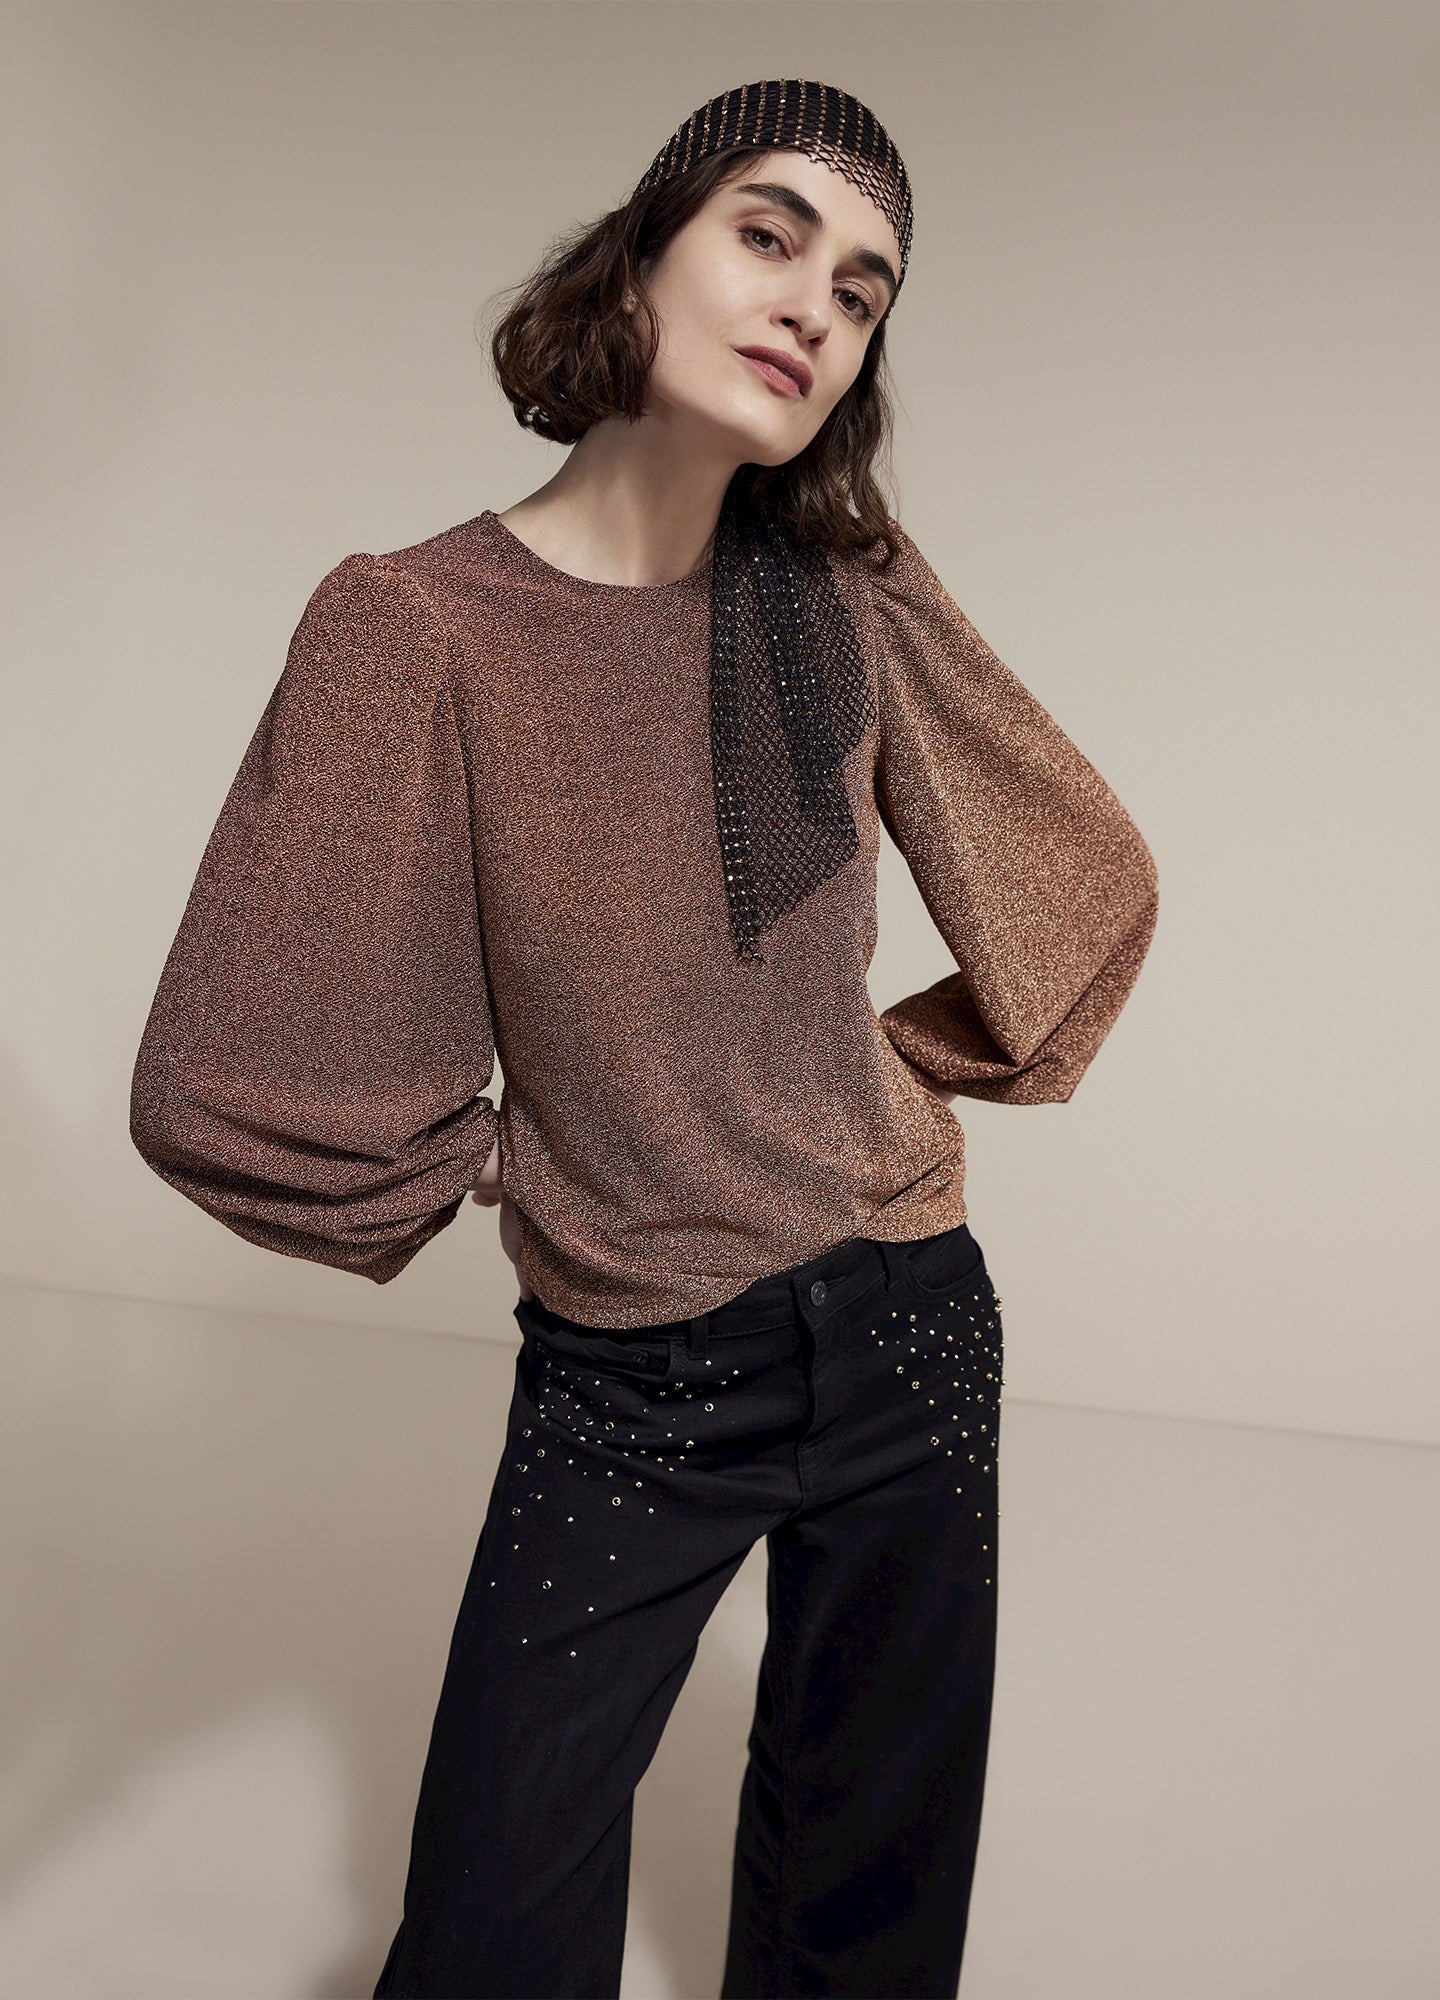 Glittery long-sleeved top